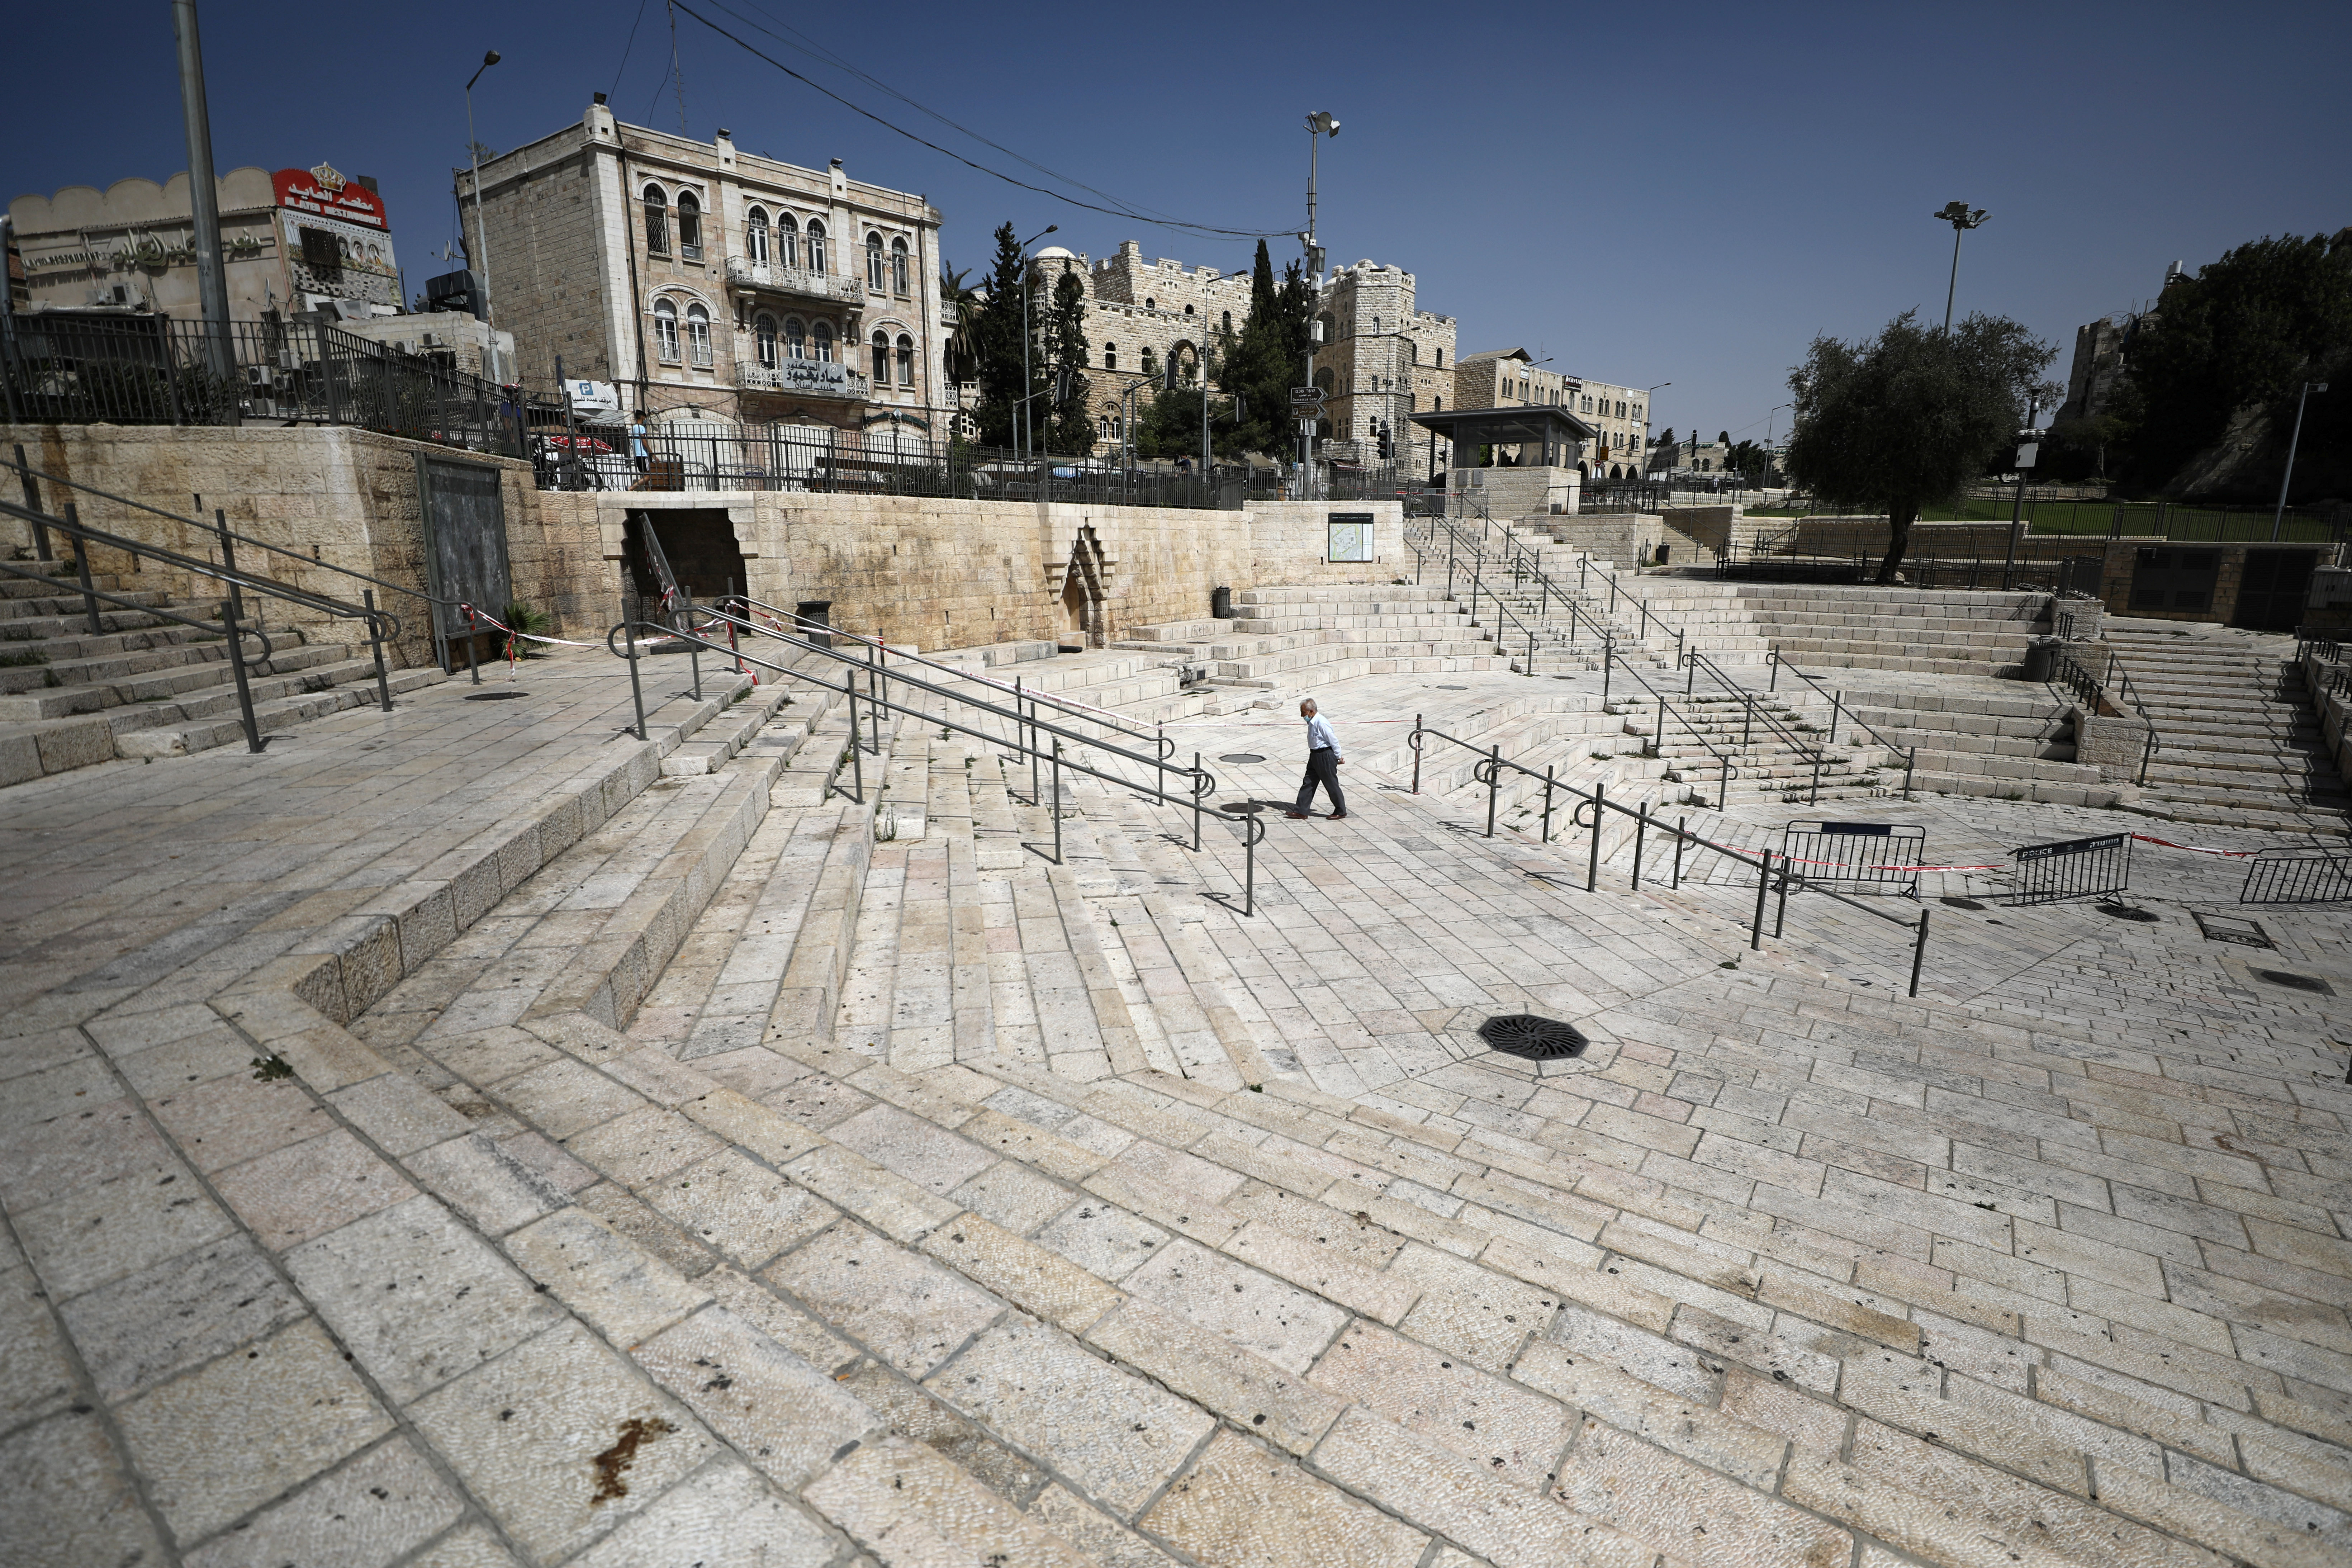 A man walks through the deserted plaza of Damascus Gate as Israel imposes a second nationwide coronavirus lockdown amid a rise in infections (Reuters)